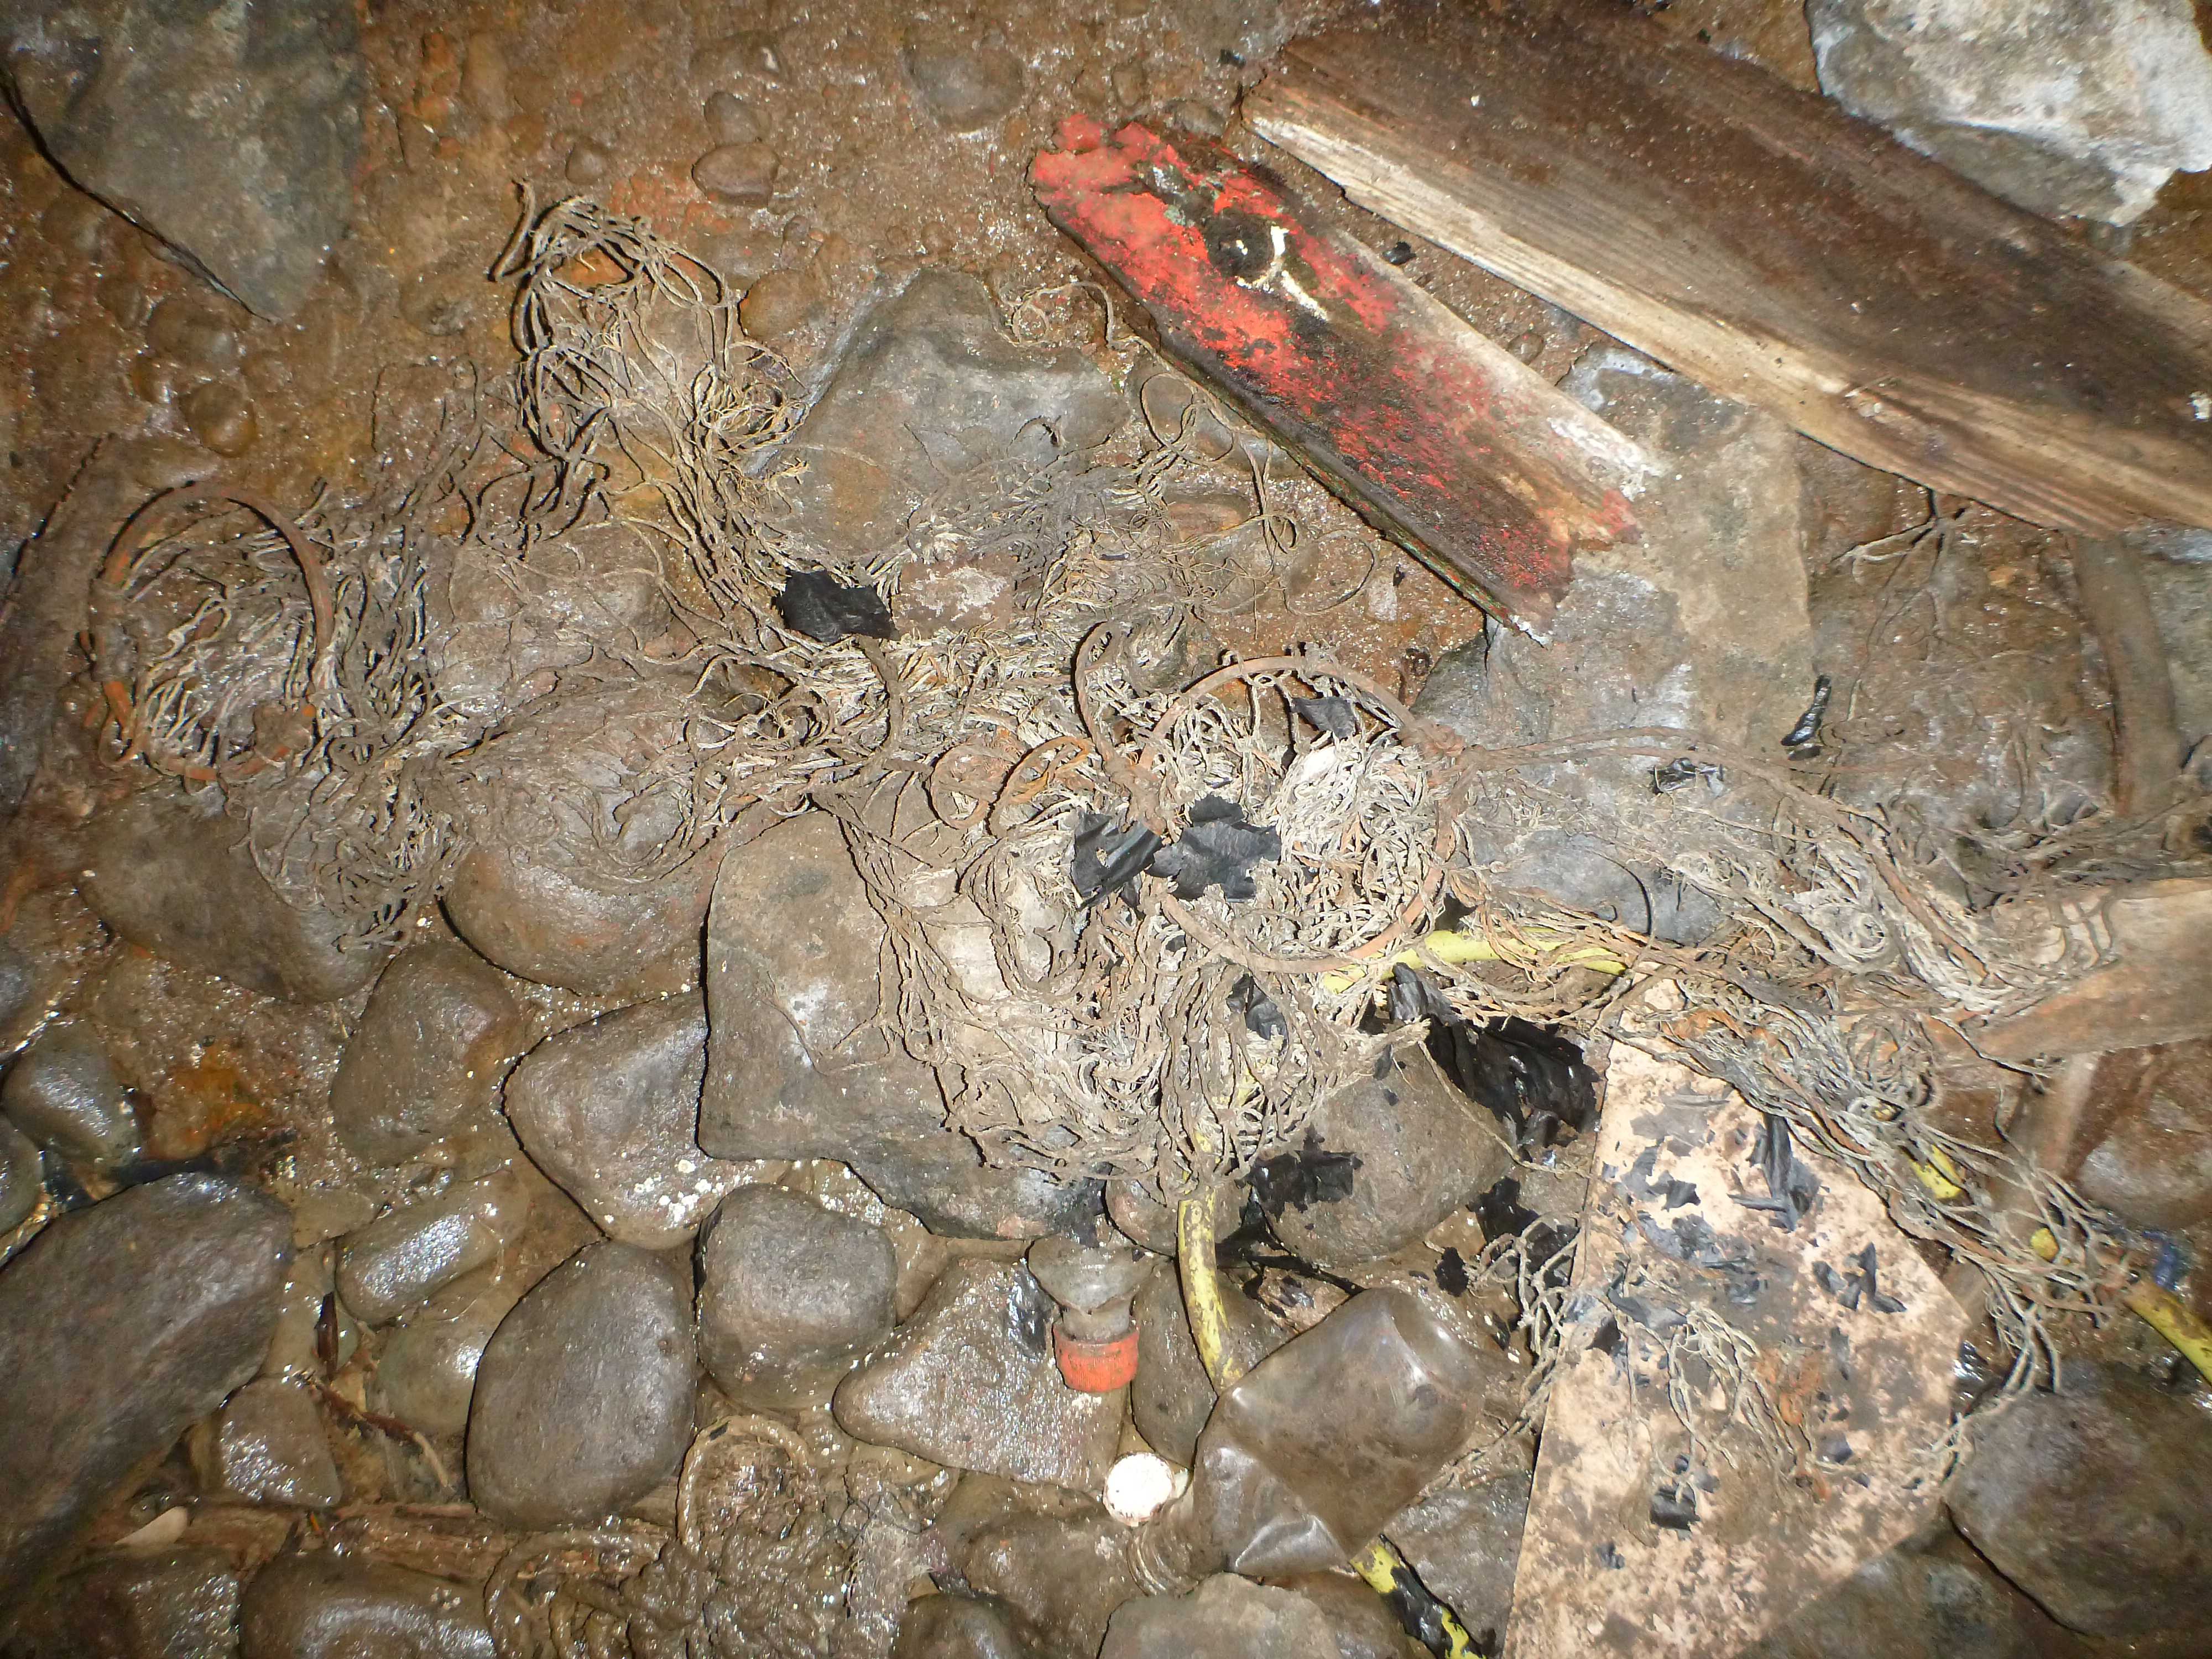 Objects and rubbish on floor of rear cavern